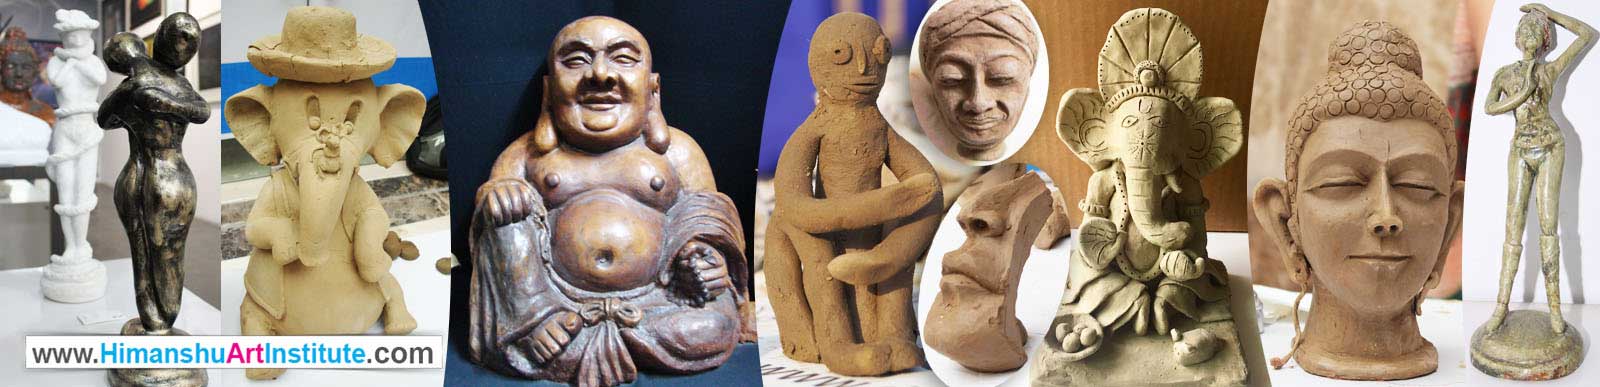 , Cerrificate Course in Clay Modeling, Clay Modeling Classes in Delhi, India